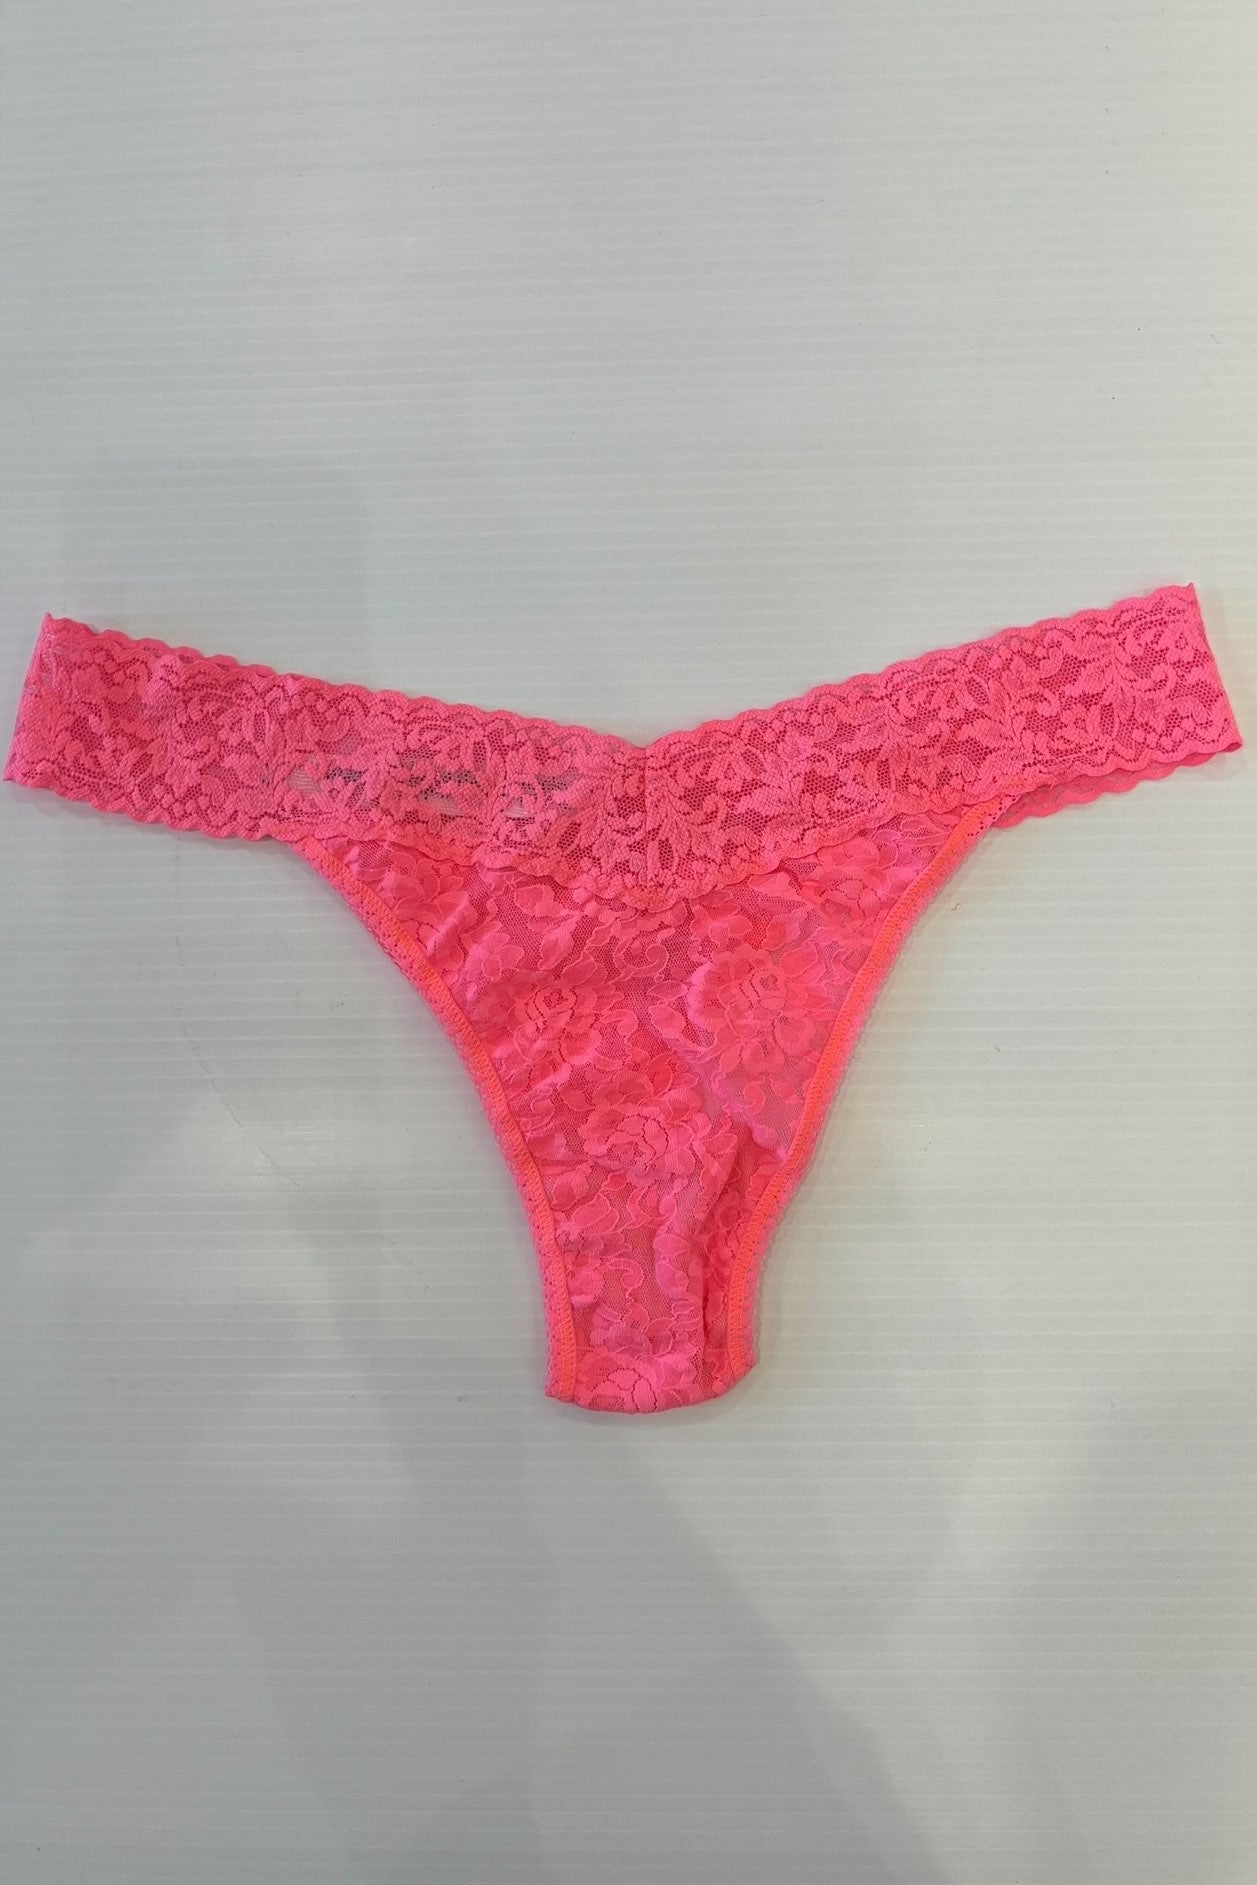 Police Auctions Canada - (3) Women's Hanky Panky Assorted Lace